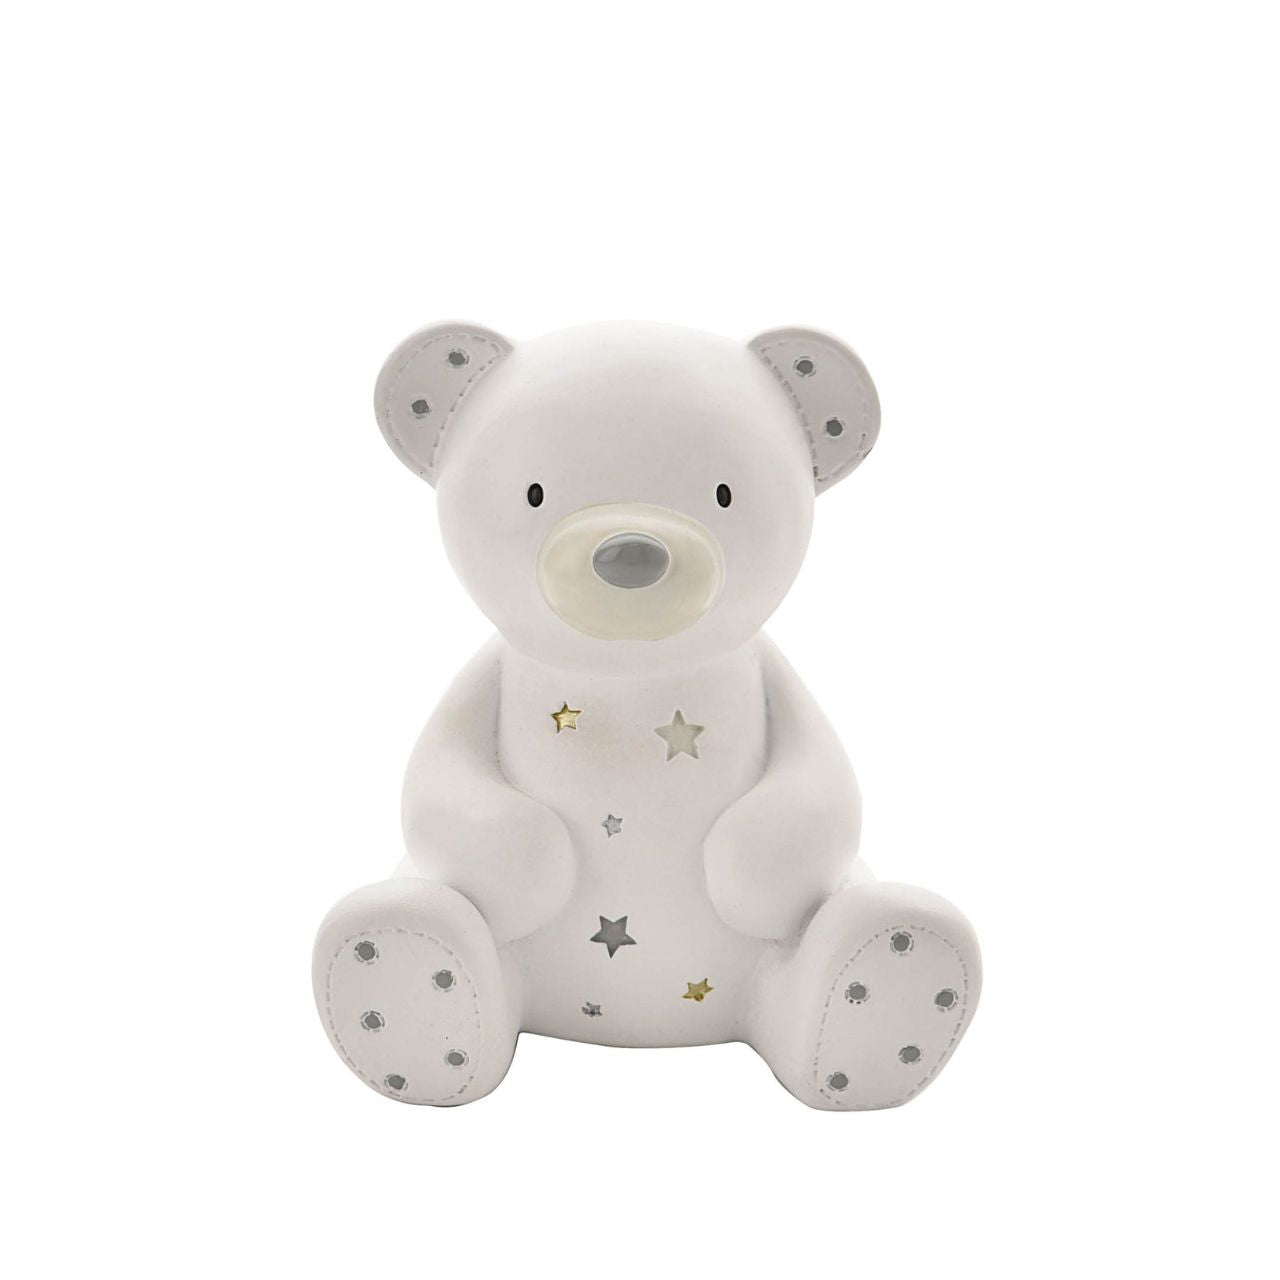 White Resin Money Box - Teddy  A teddy bear shaped resin money box from BAMBINO BY JULIANA.  This wonderful keepsake provides beautiful decoration for the nursery of new family arrivals which will be cherished eternally.